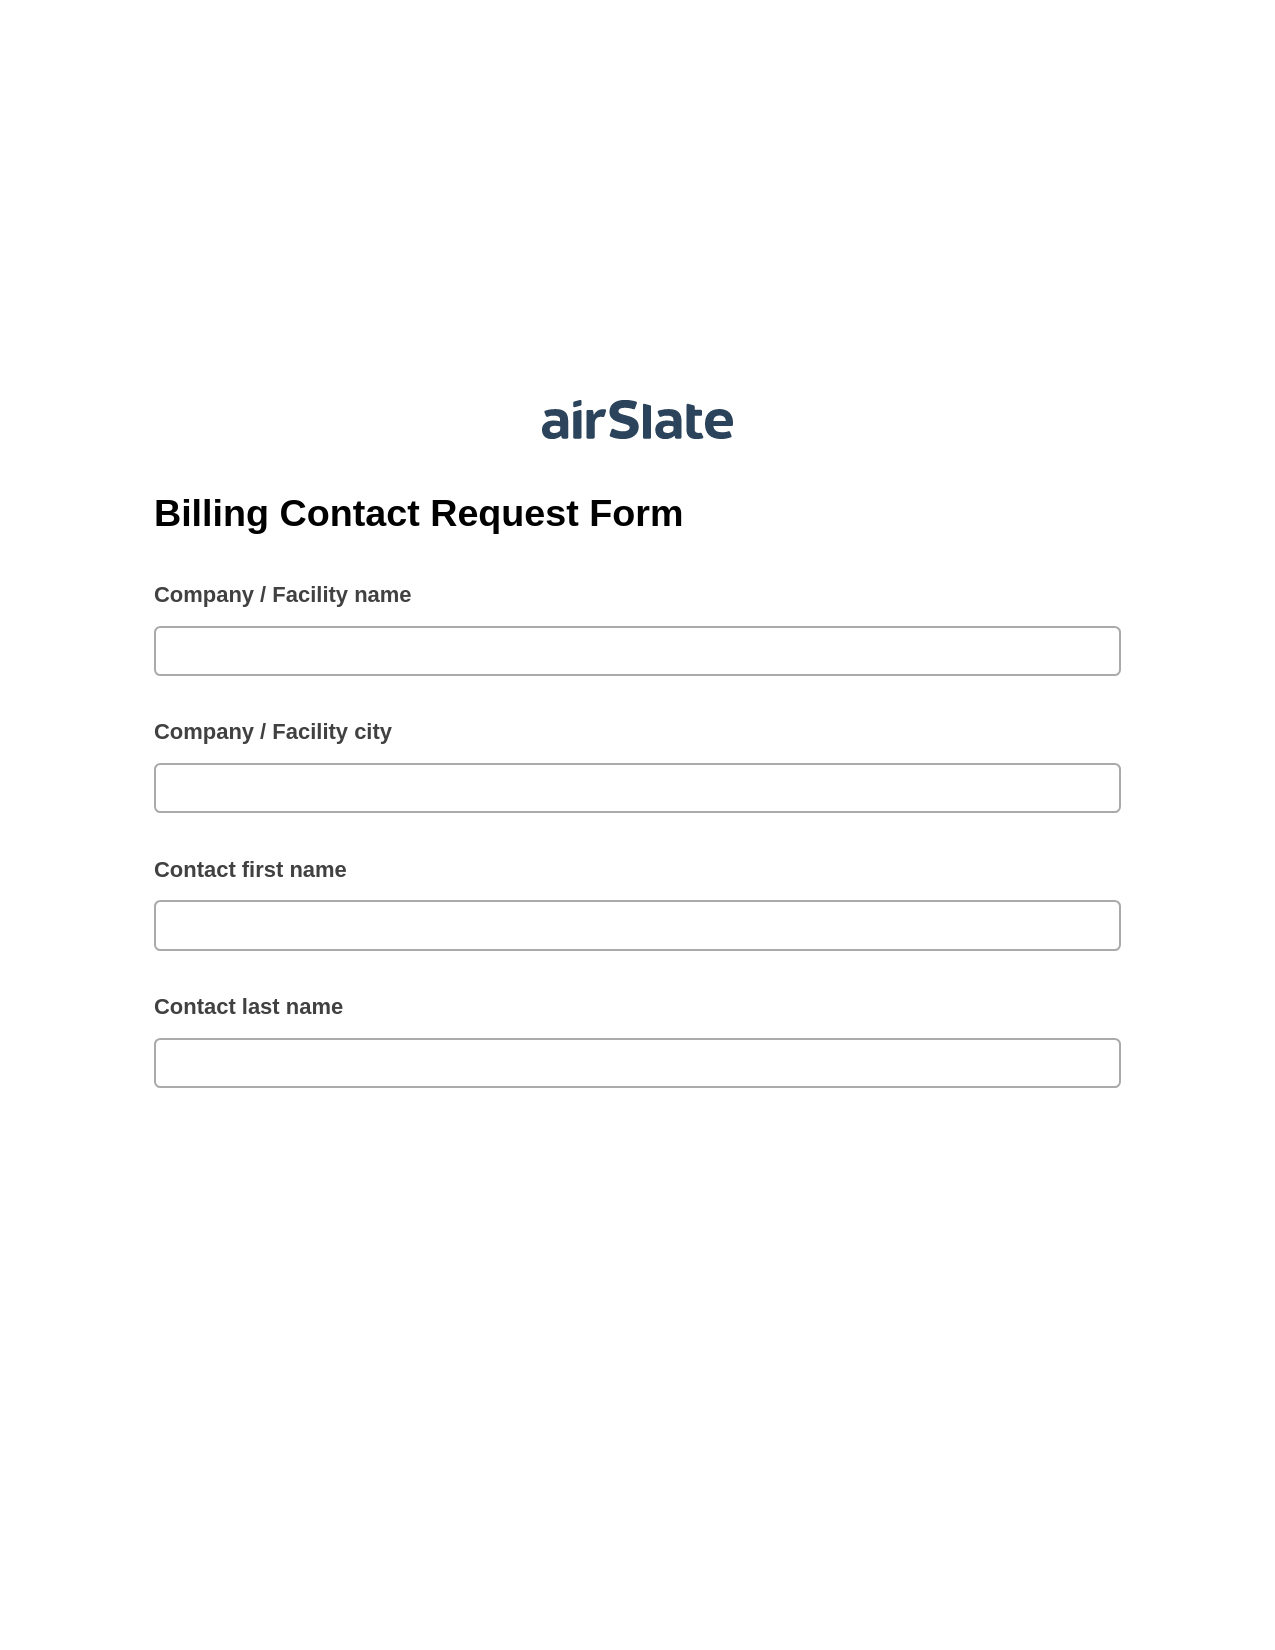 Billing Contact Request Form Pre-fill from Salesforce Record Bot, Audit Trail Bot, Webhook Postfinish Bot